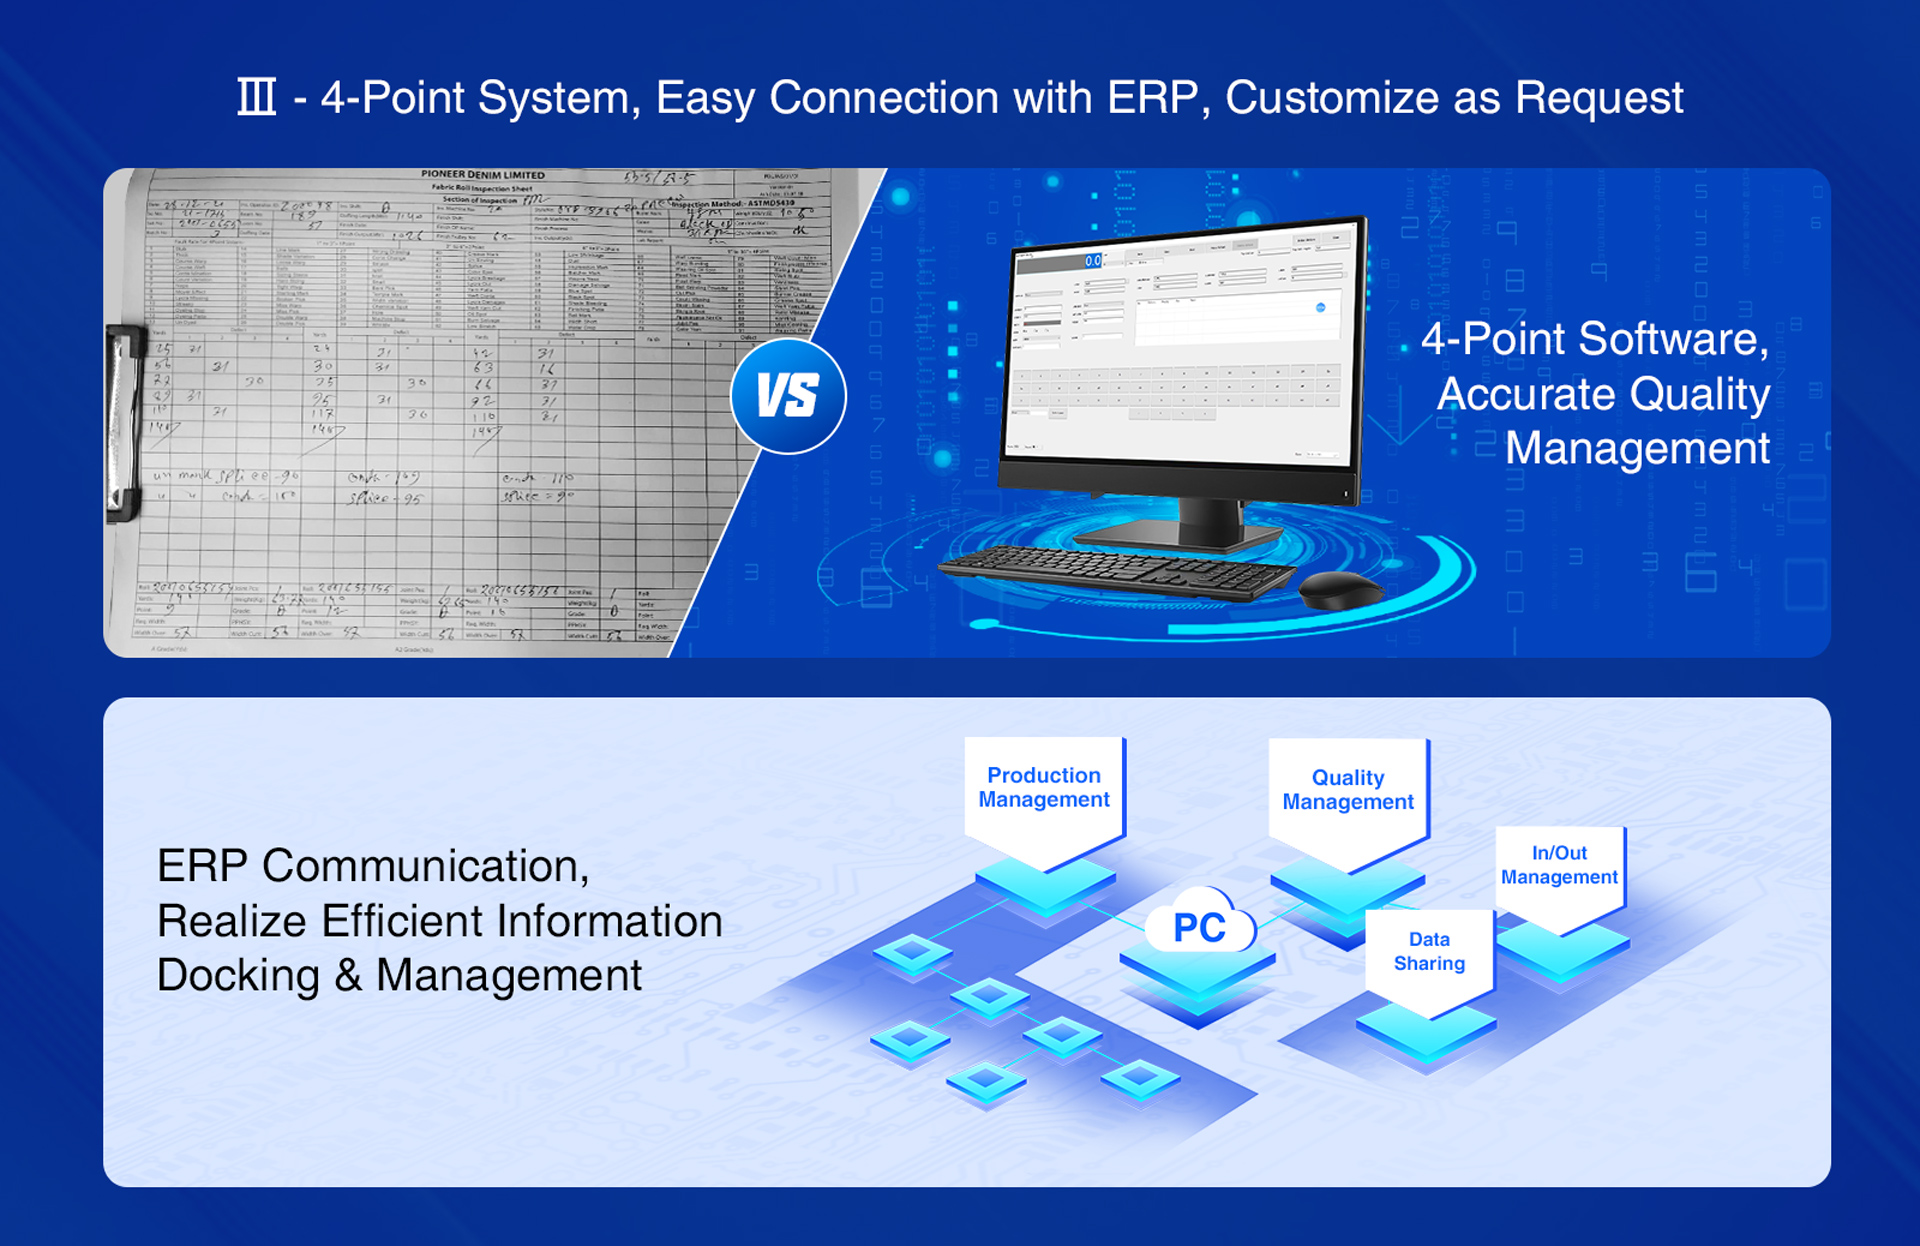 4-Point System, Easy Connection with ERP, Customize as Request